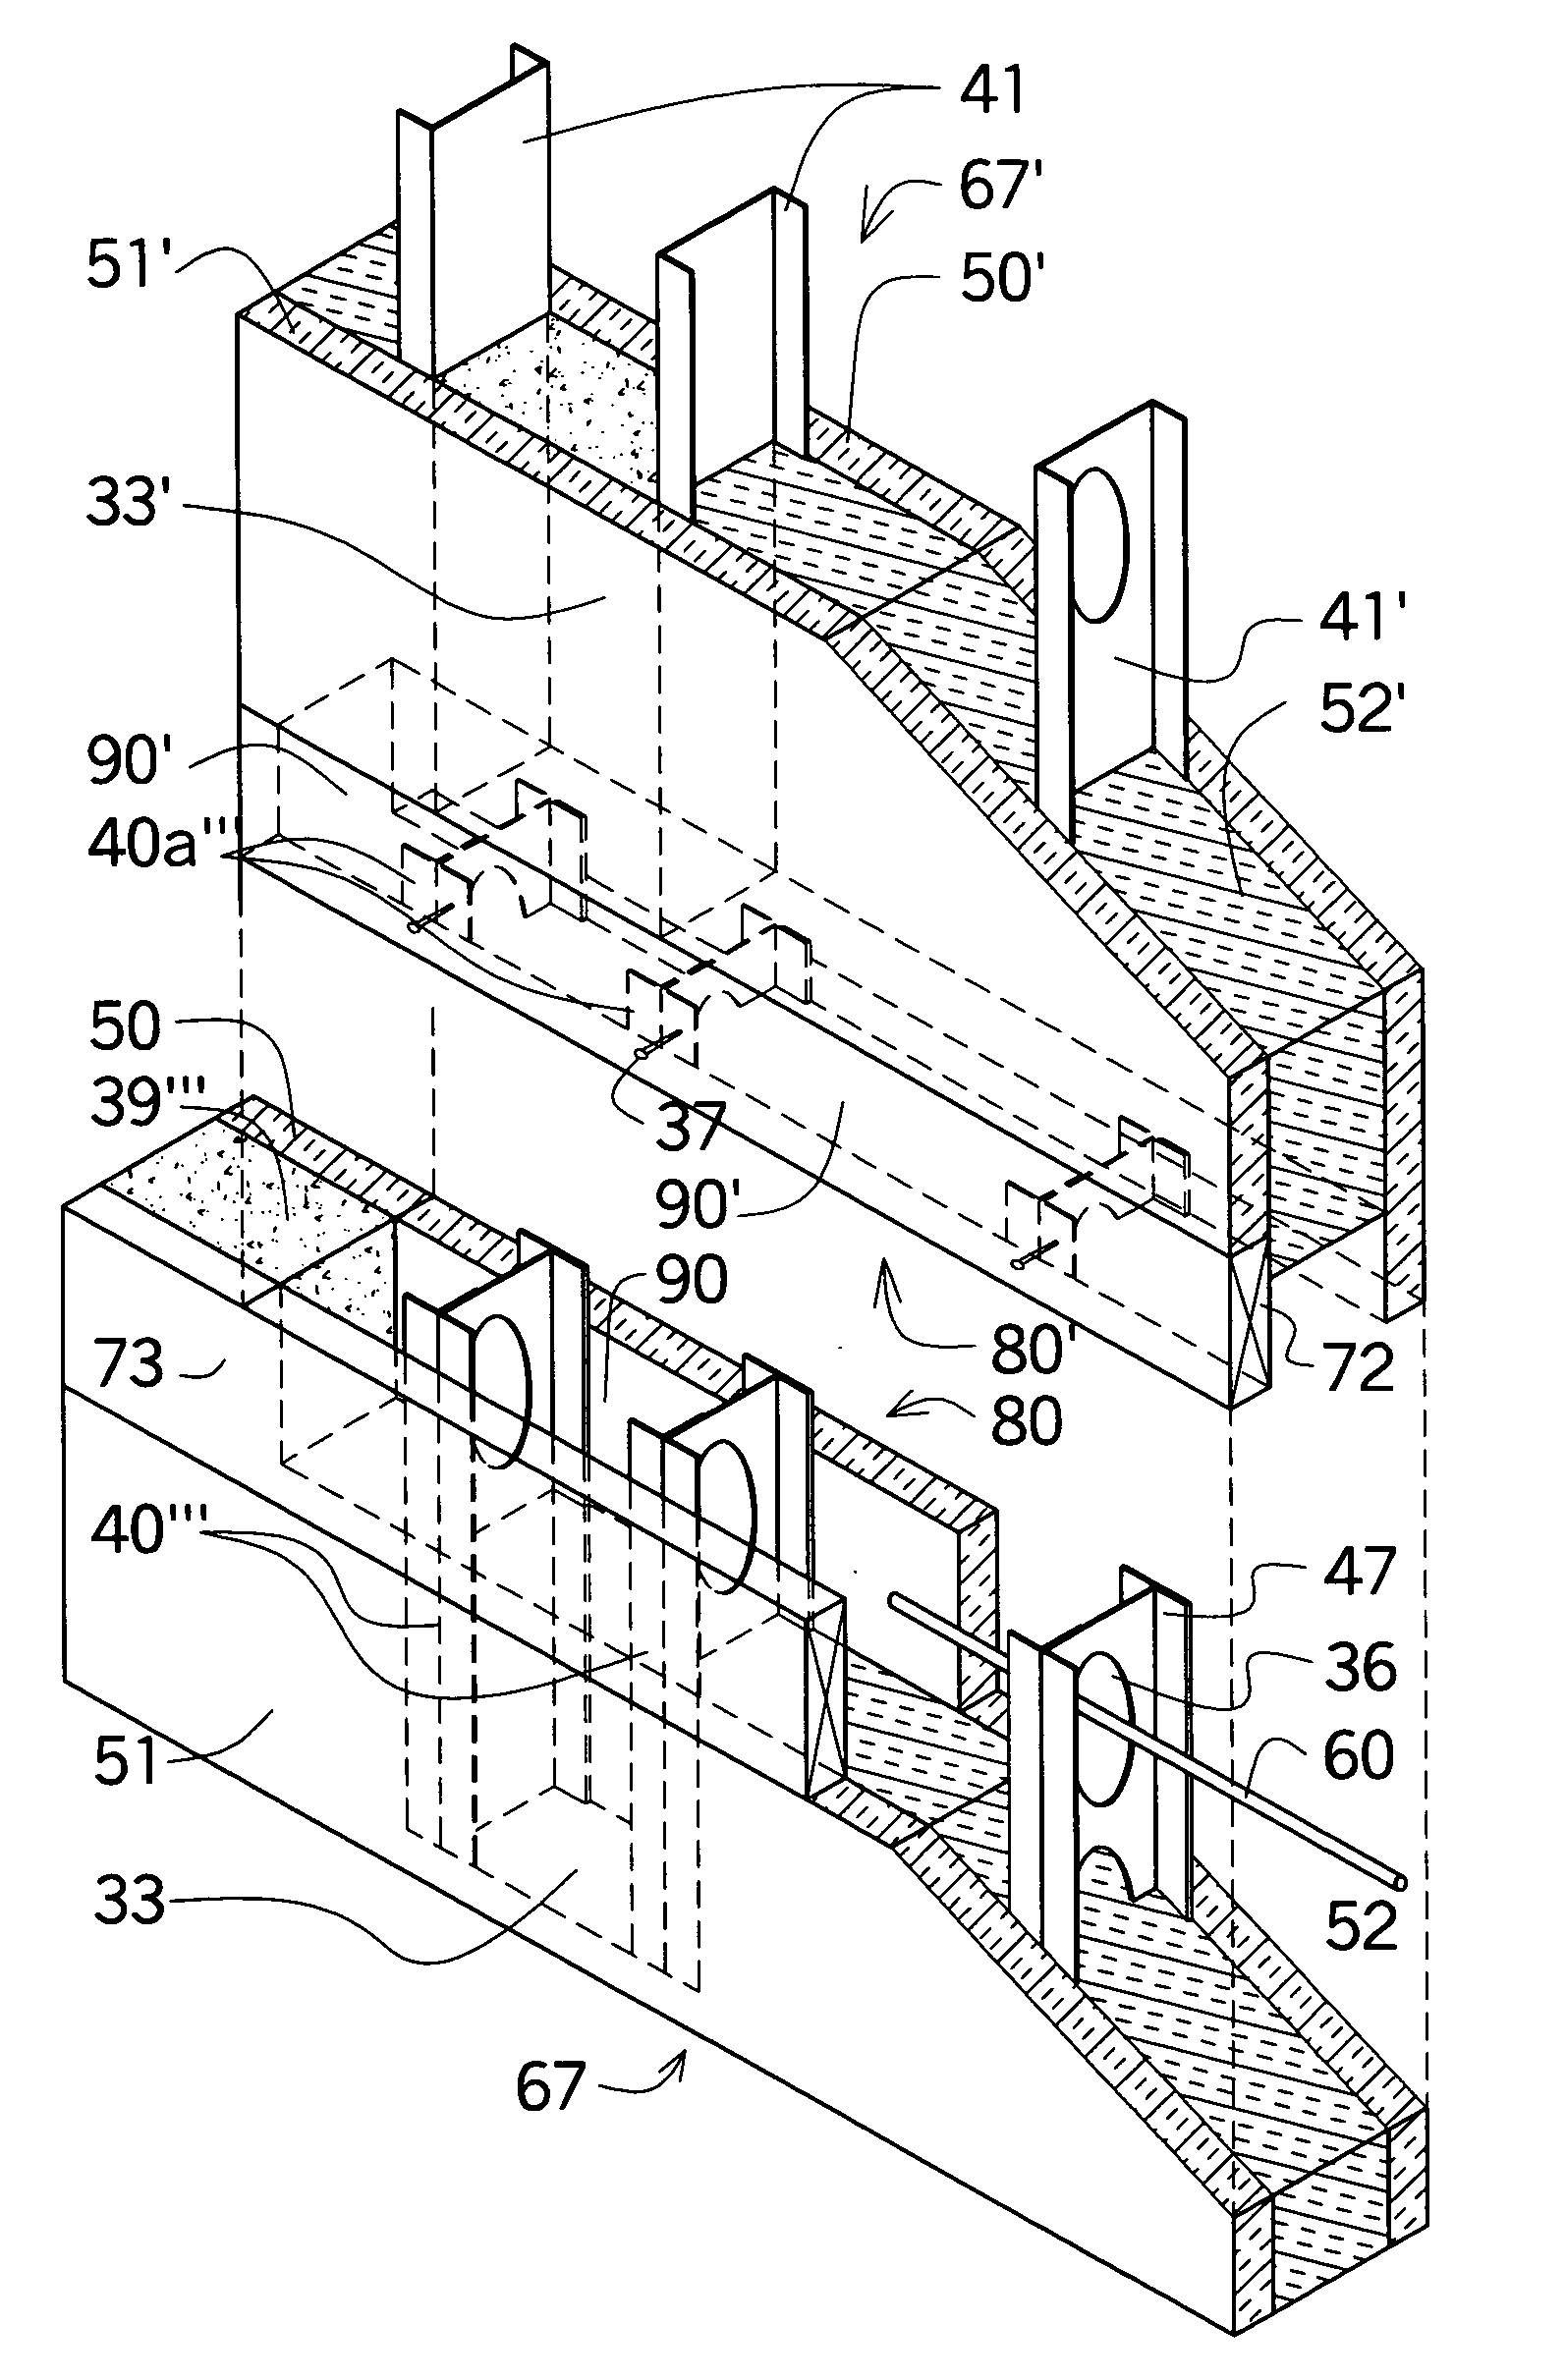 Building construction for forming columns and beams within a wall mold